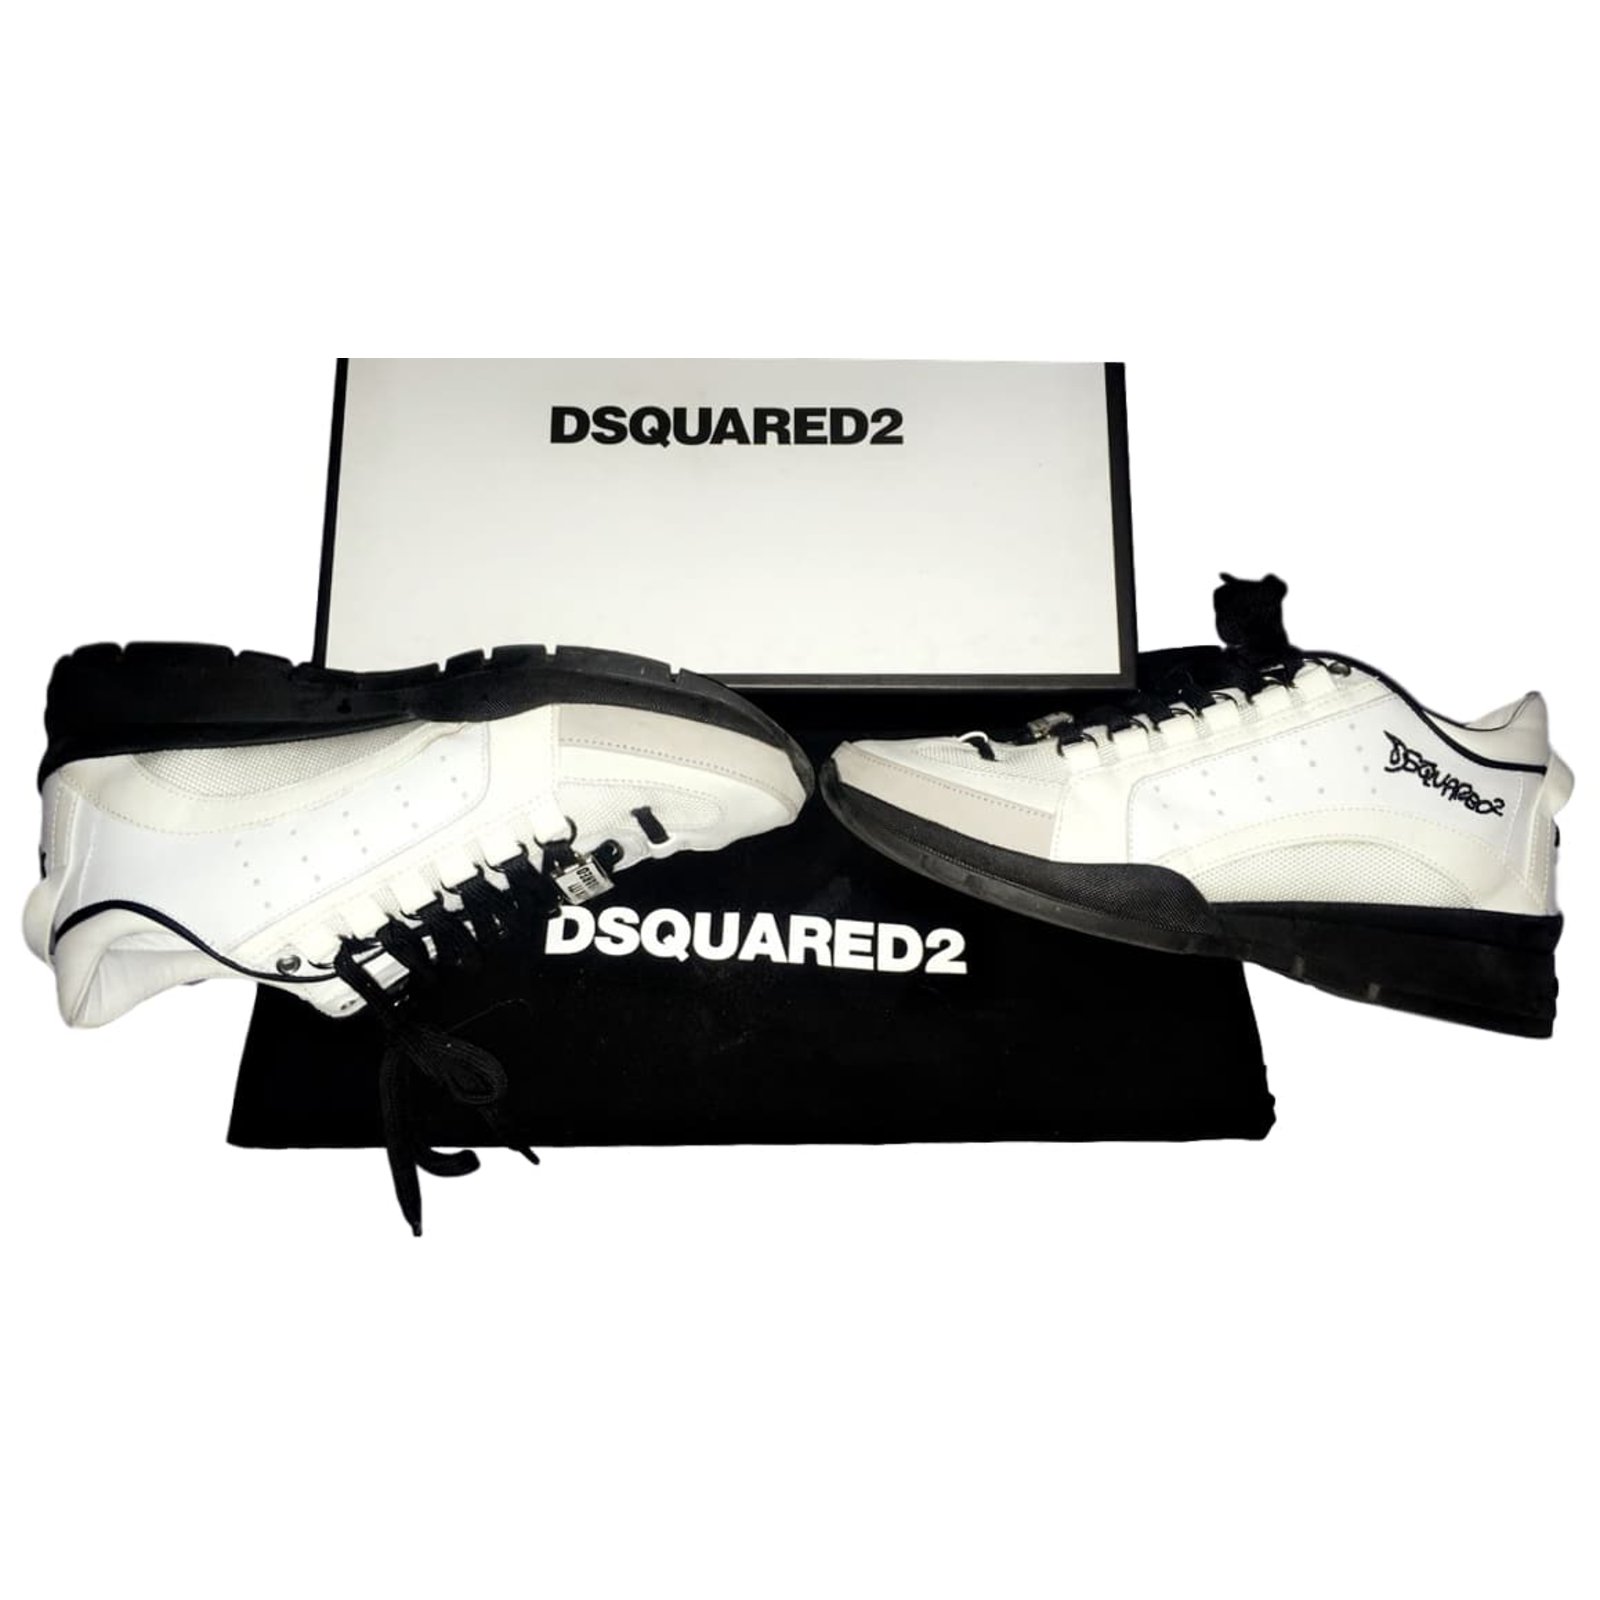 dsquared2 sneakers 2017